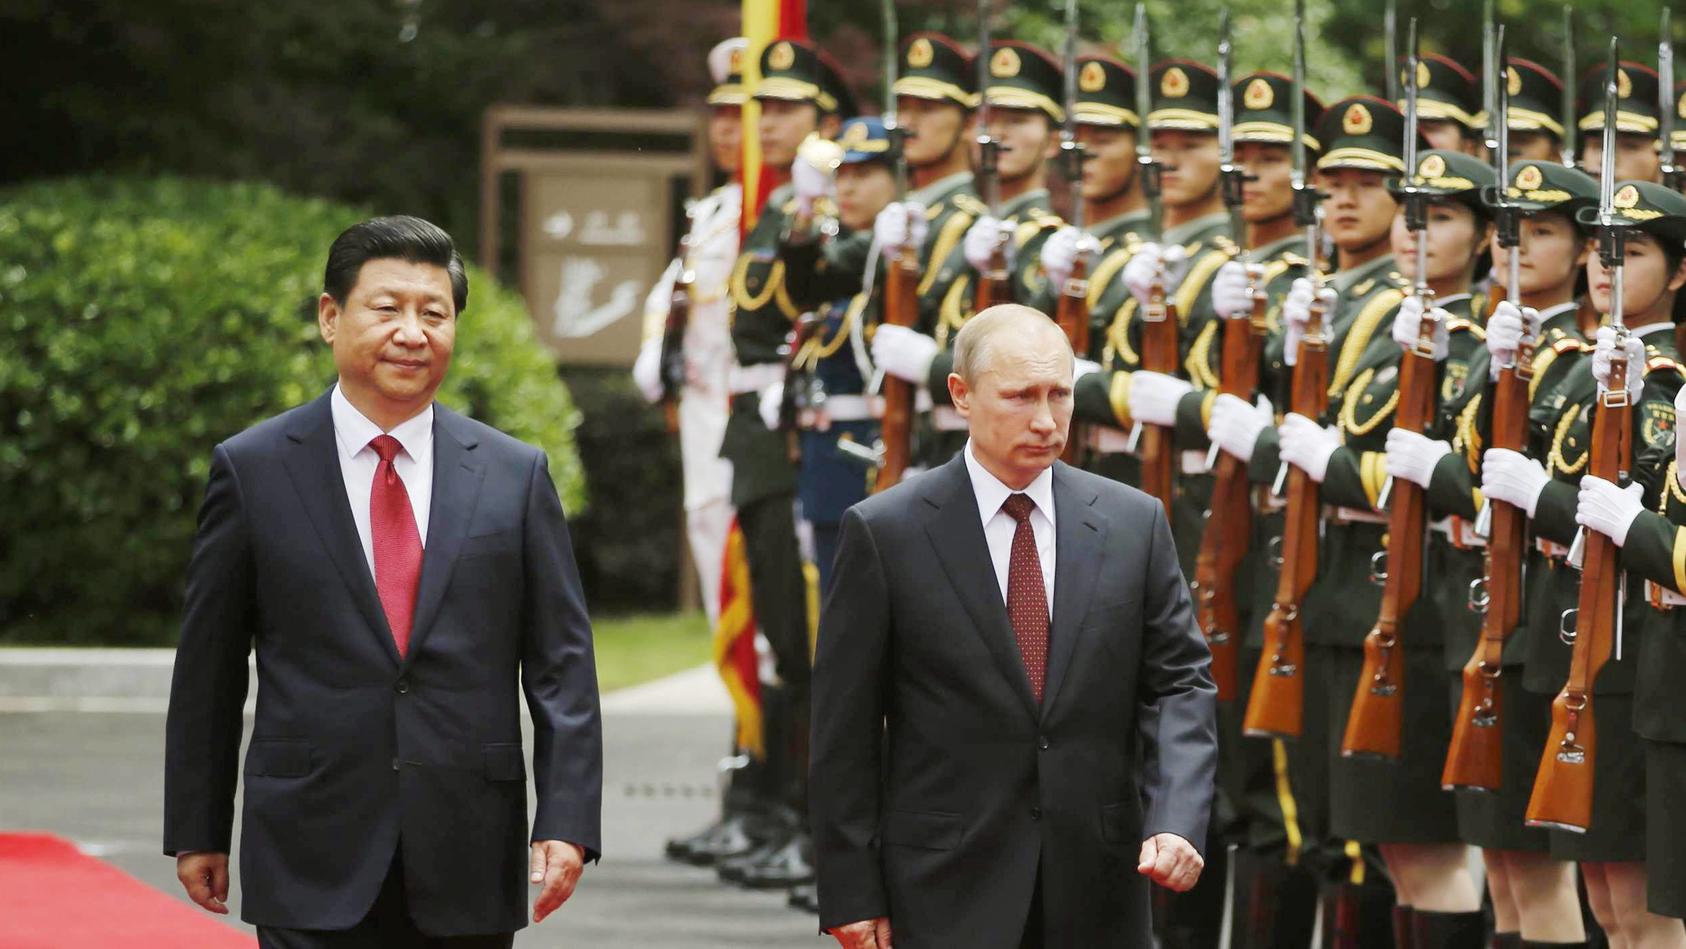 SHANGHAI, China - Chinese President Xi Jinping (L) and his Russian counterpart Vladimir Putin attend a ceremony welcoming Putin to China, in Shanghai on May 20, 2014. (Pool photo) PUBLICATIONxINxGERxSUIxAUTxHUNxONLY 0520026Shanghai China Chinese Pres